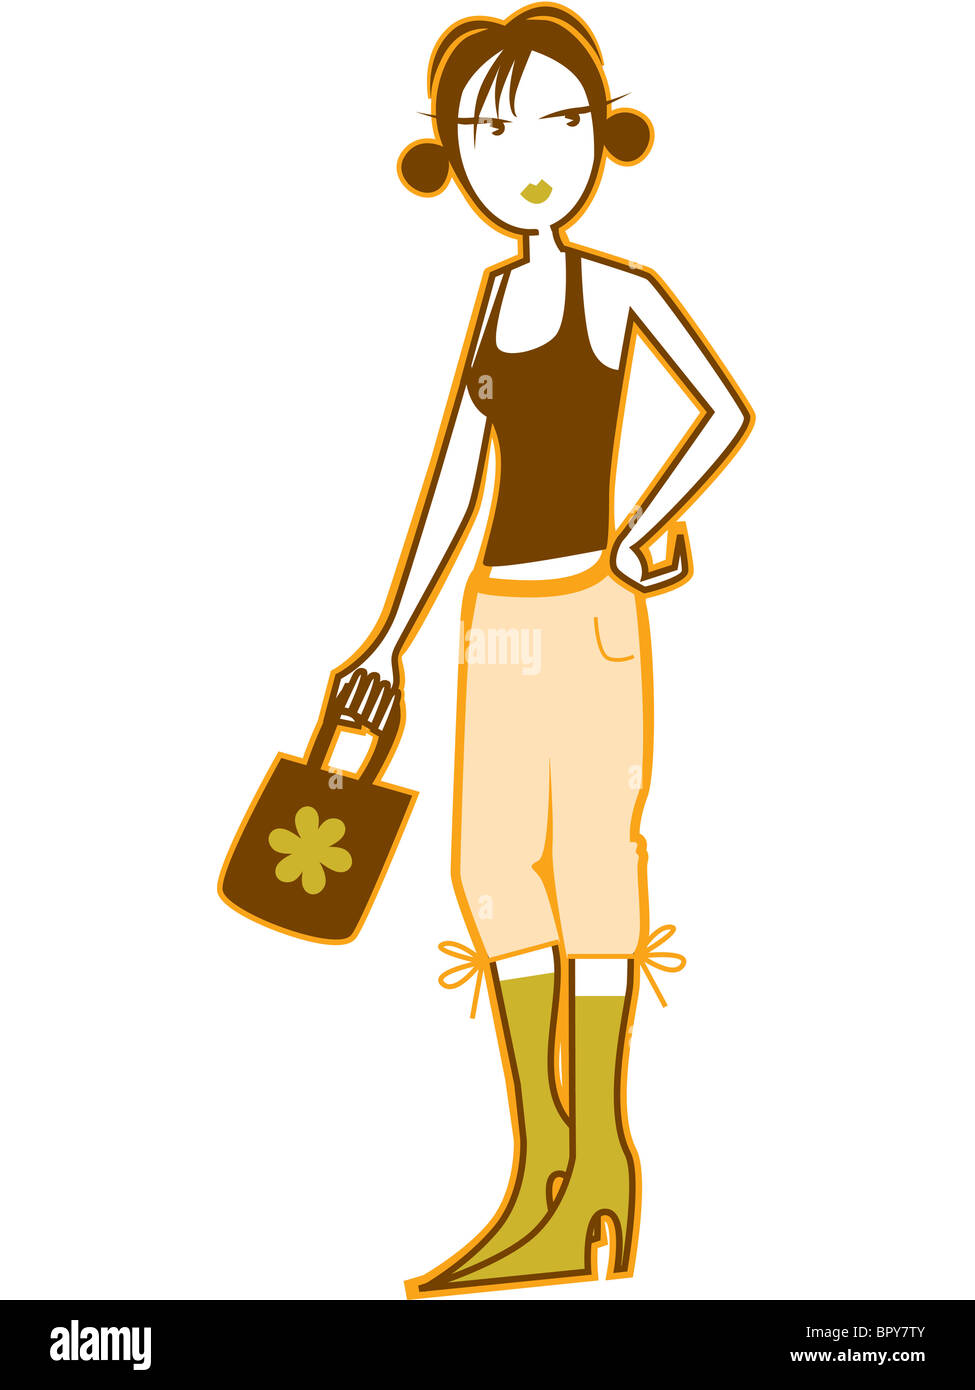 Illustration of a girl holding a purse Stock Photo